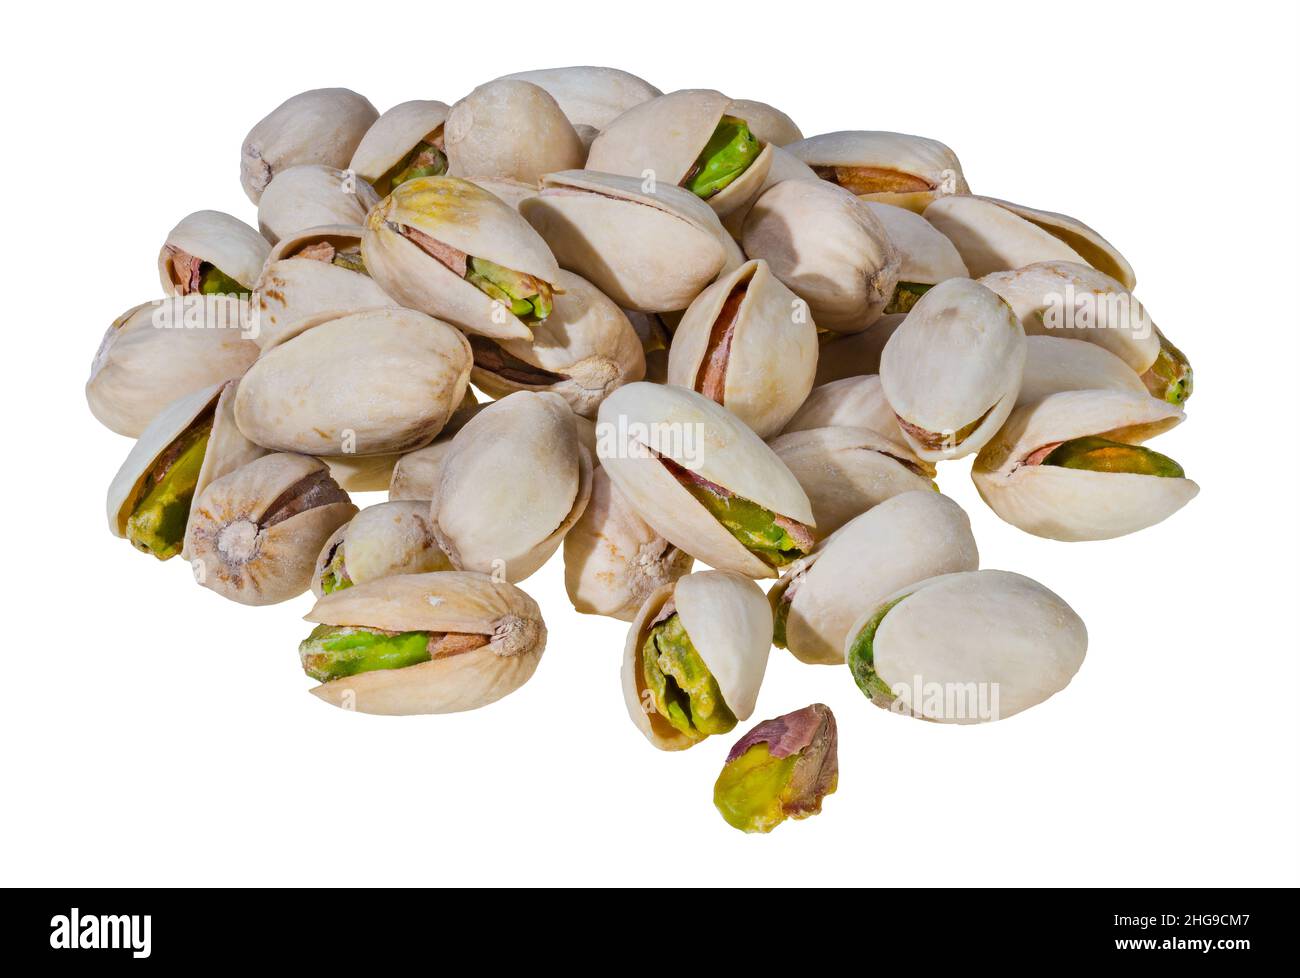 Closeup of roasted salted pistachios pile isolated on a white background. Pistacia vera. Yummy green pistachio cores in beige open split halved shells. Stock Photo